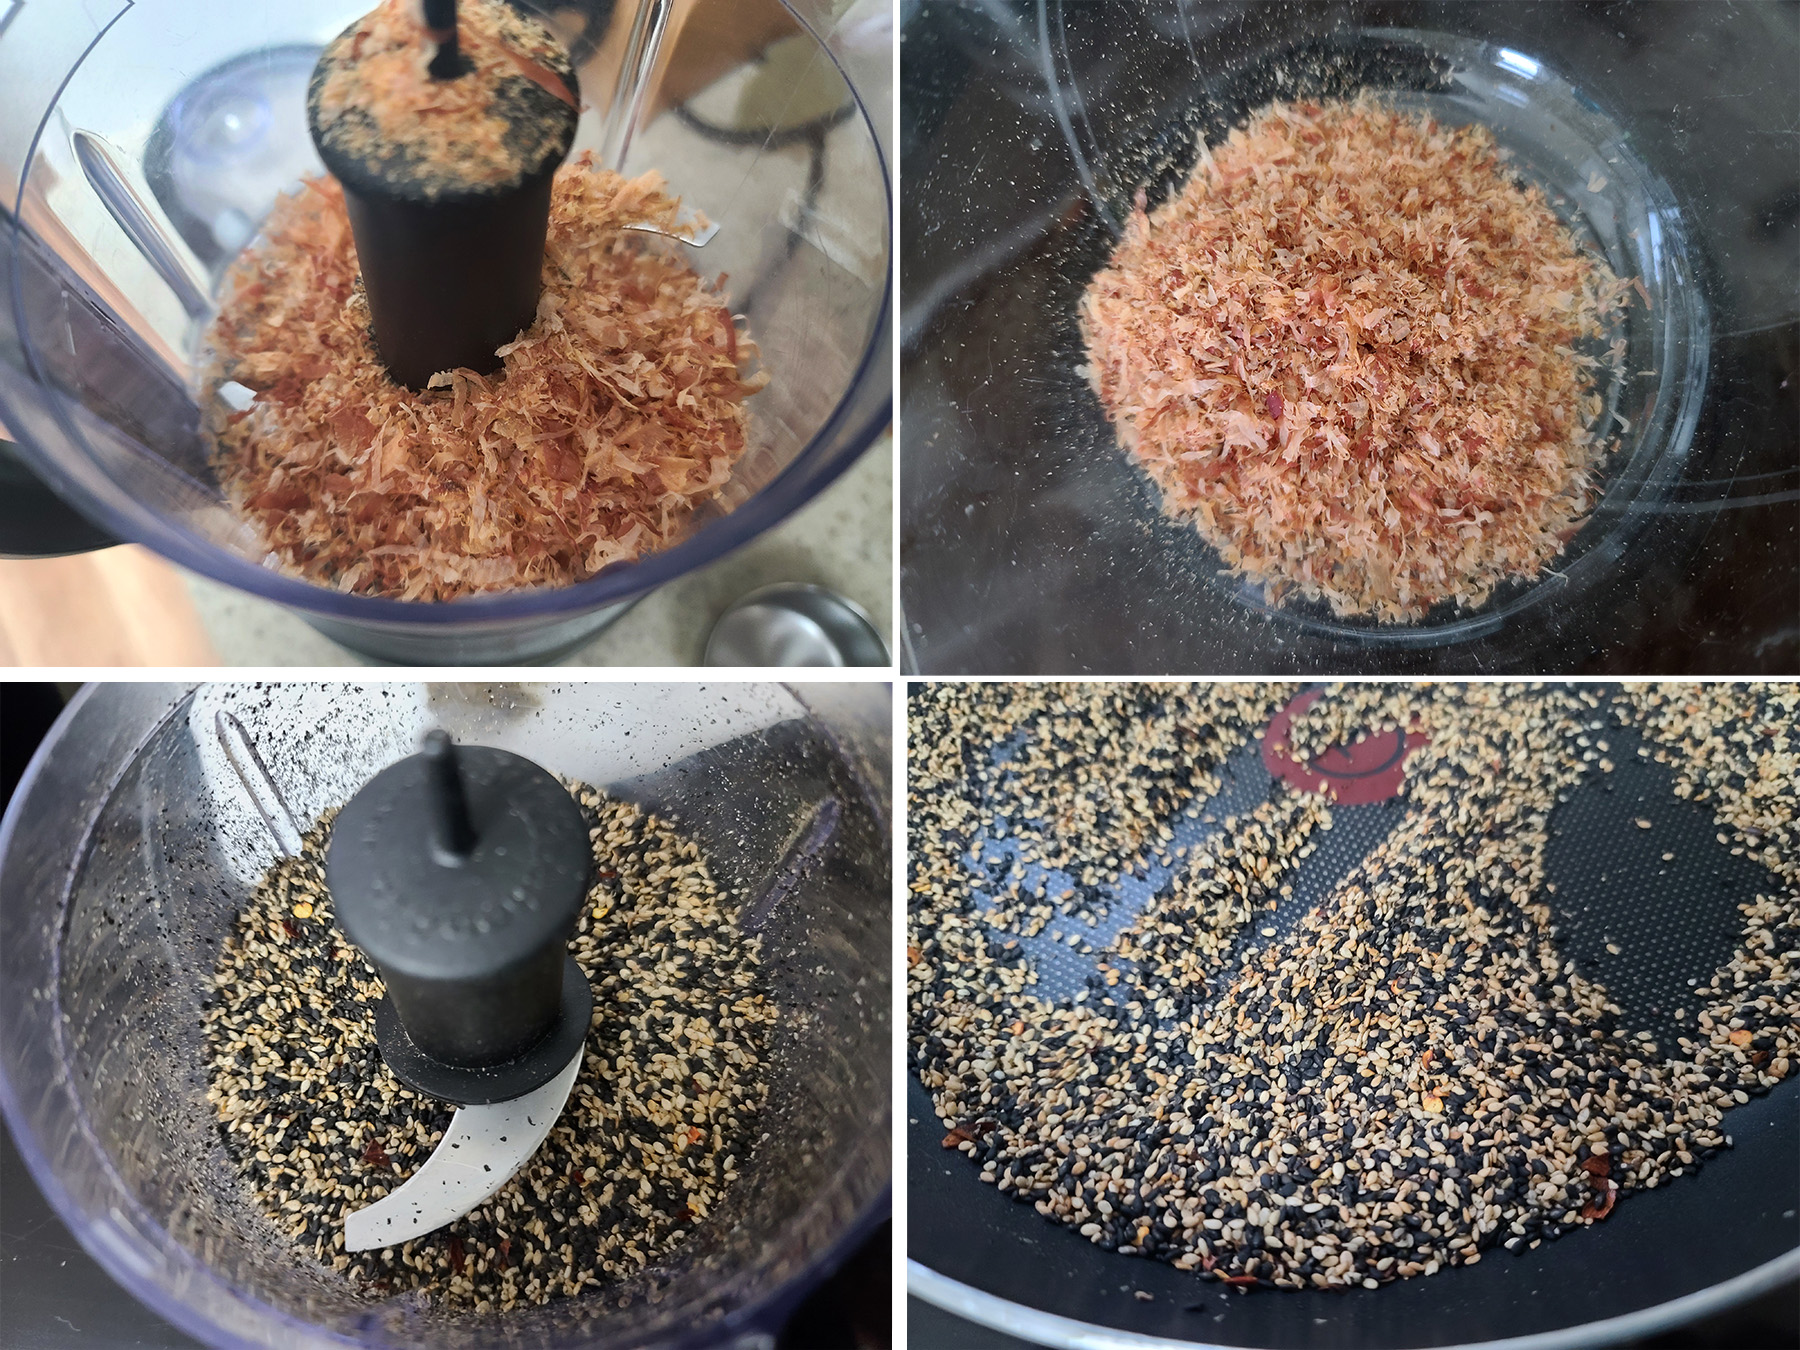 A 4 part image showing sesame seeds being toasted, and bonito flakes being ground down.